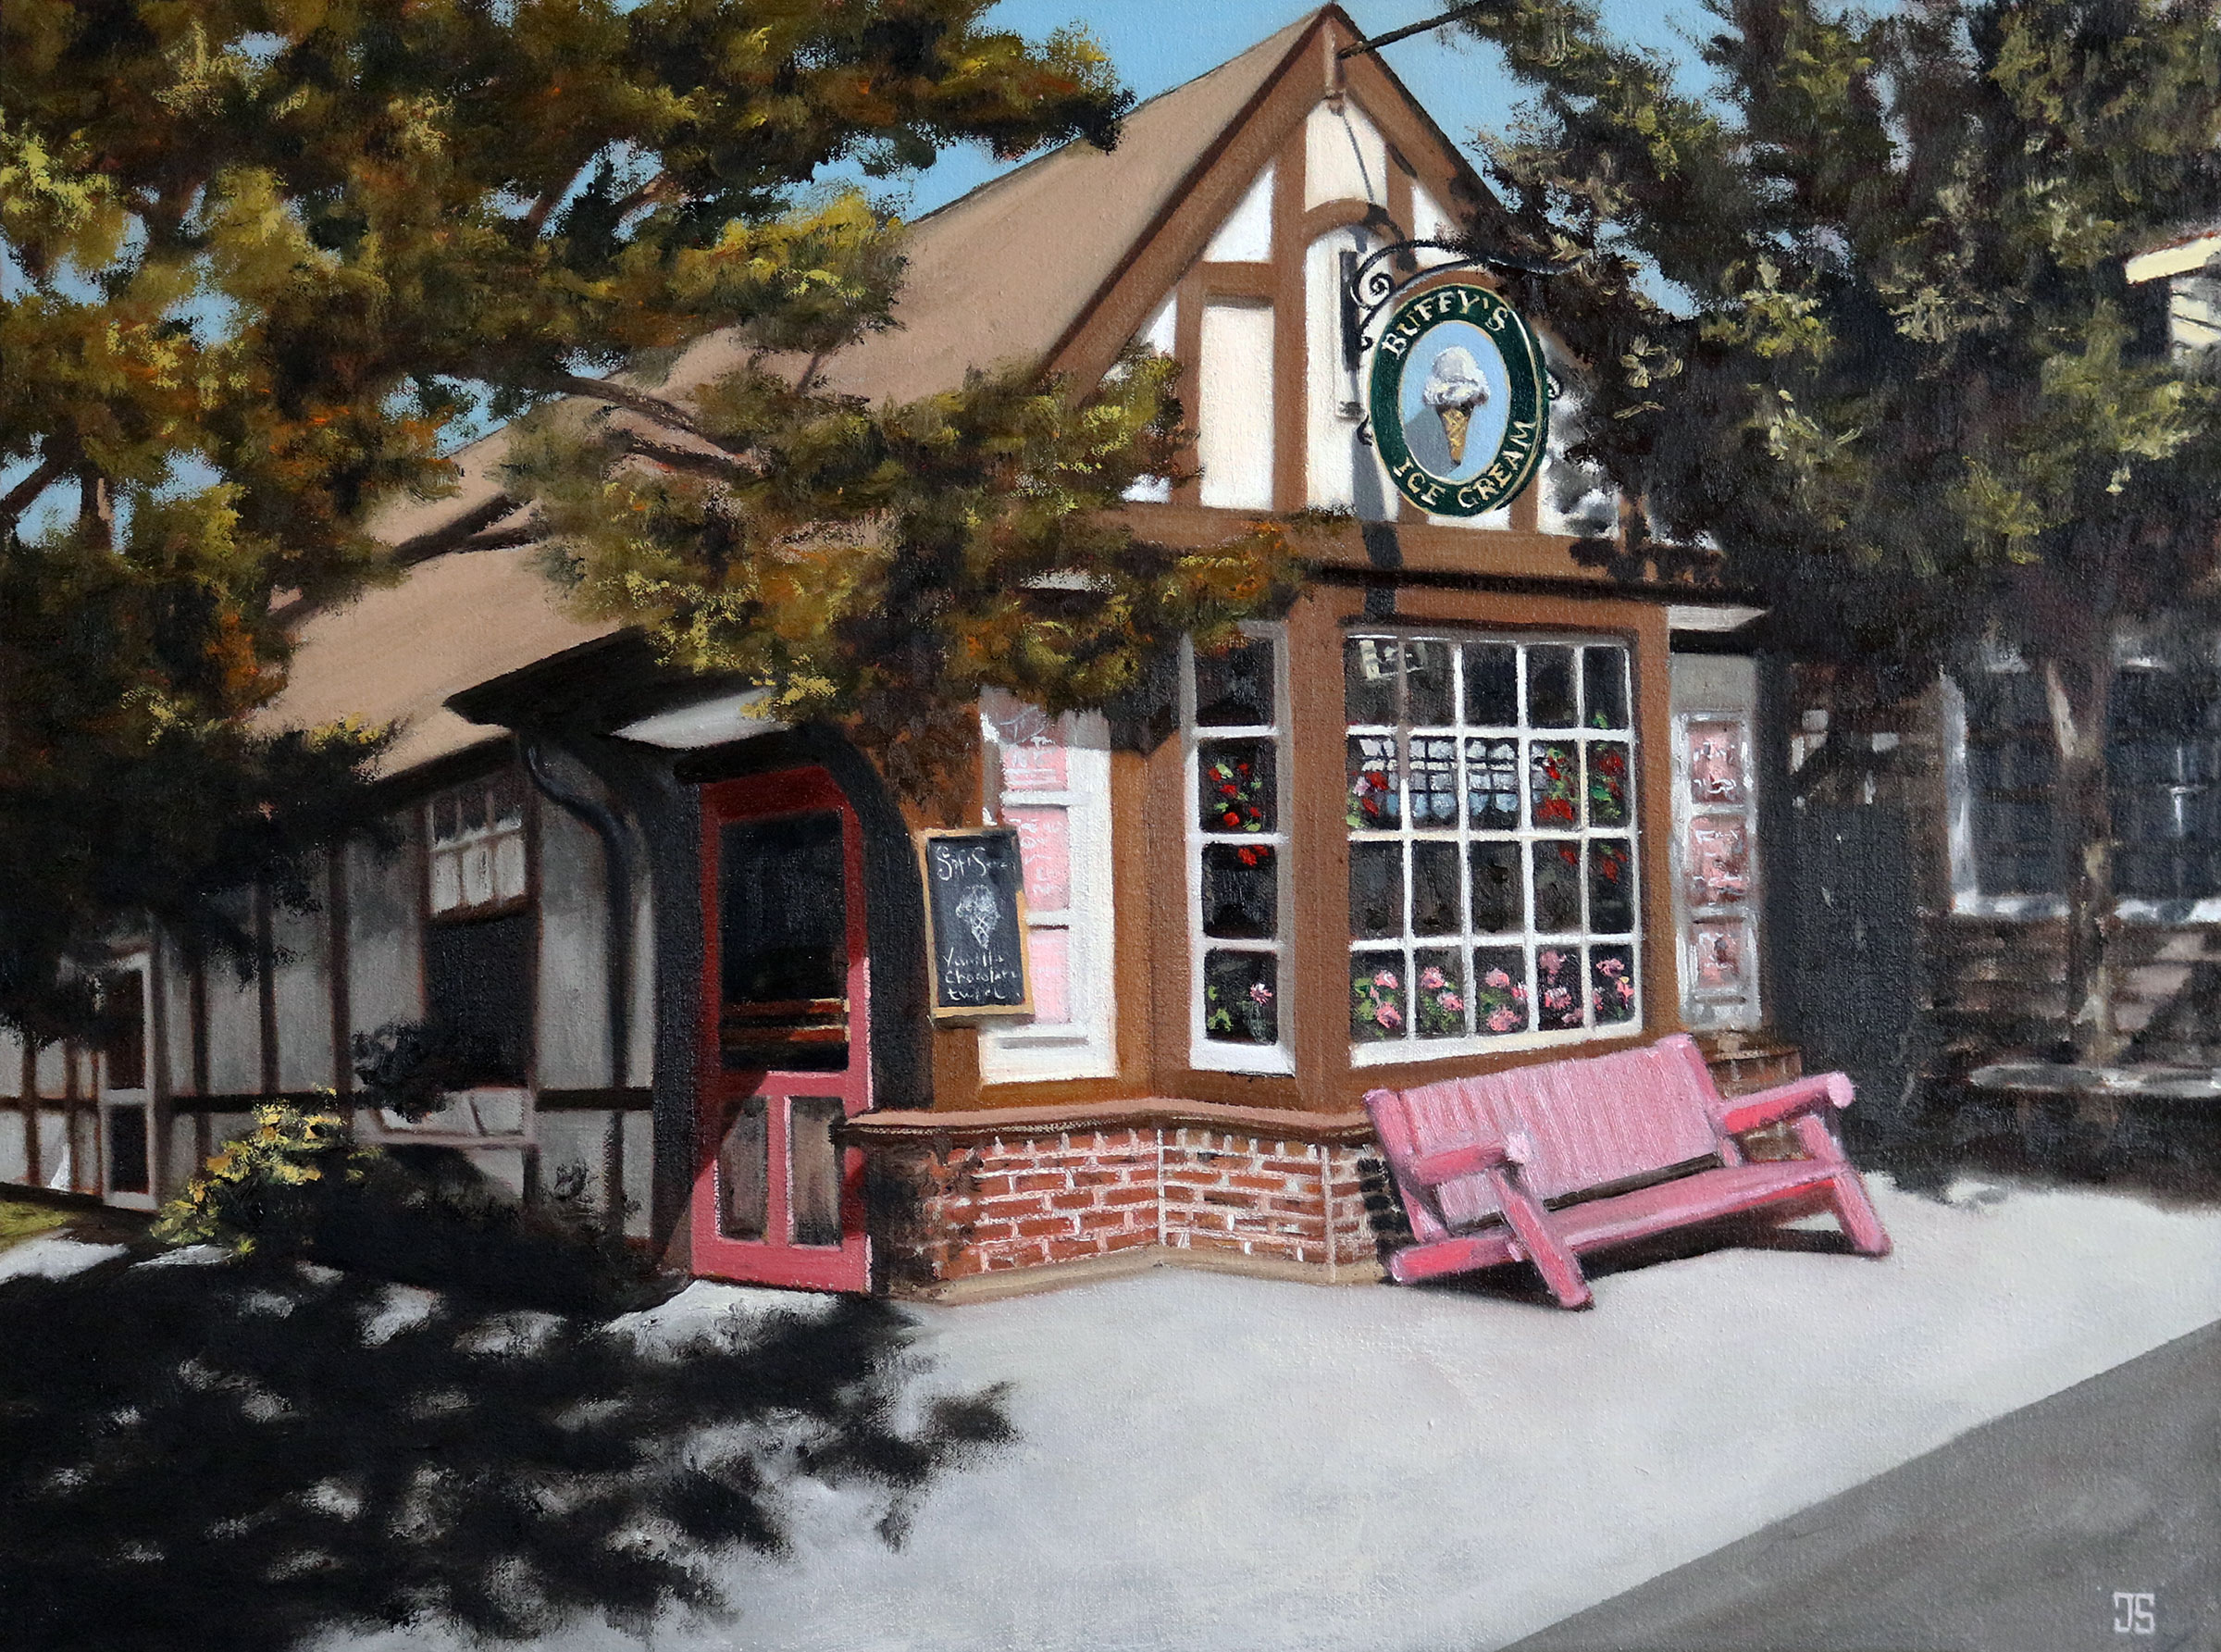 Oil painting "Buffy's Ice Cream, Chatham" by Jeffrey Dale Starr